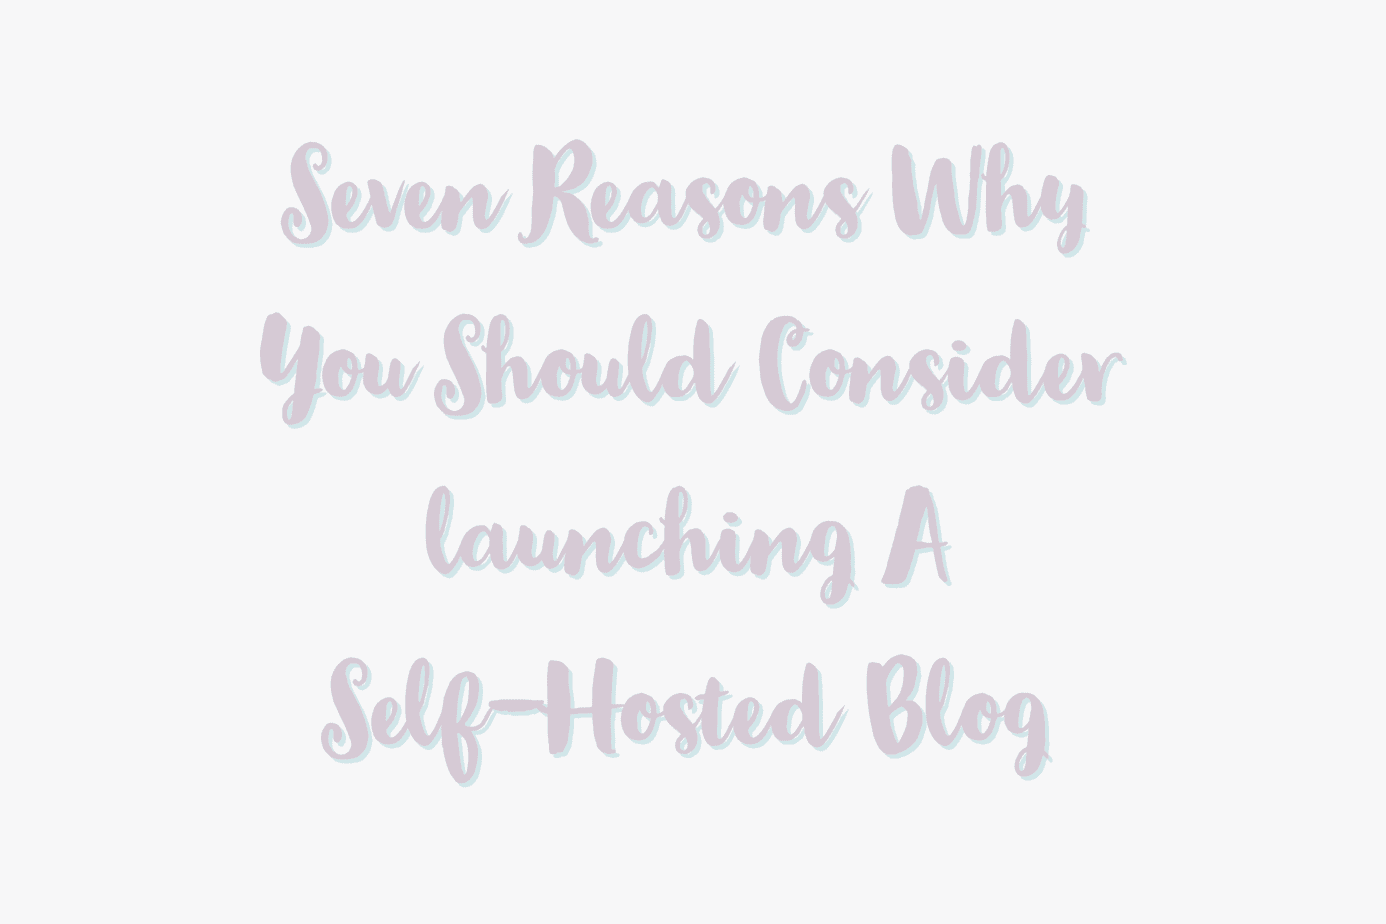 Seven Reasons Why You Should Consider Launching A Self-Hosted Blog